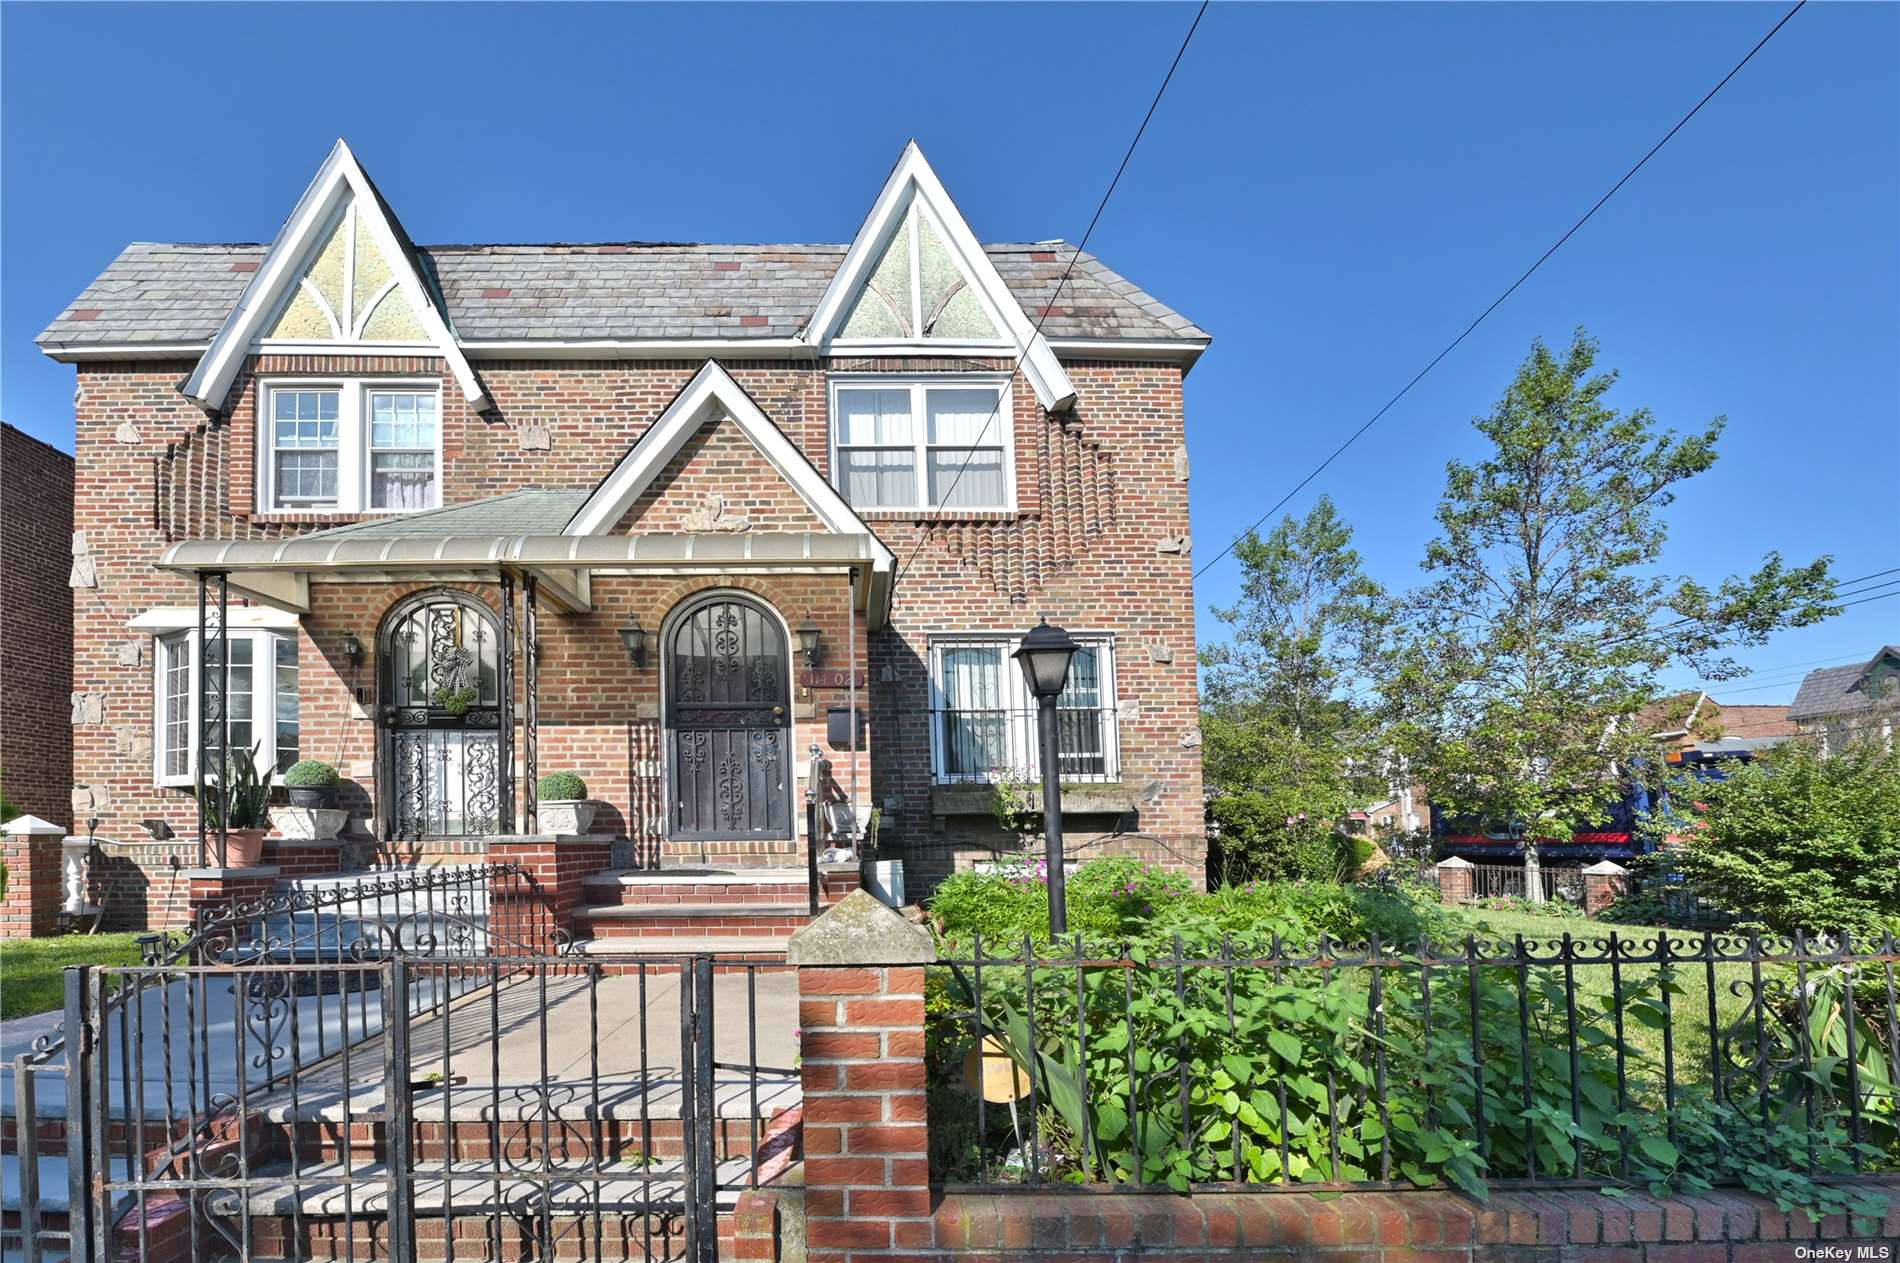 Single Family in Saint Albans - 205th  Queens, NY 11412